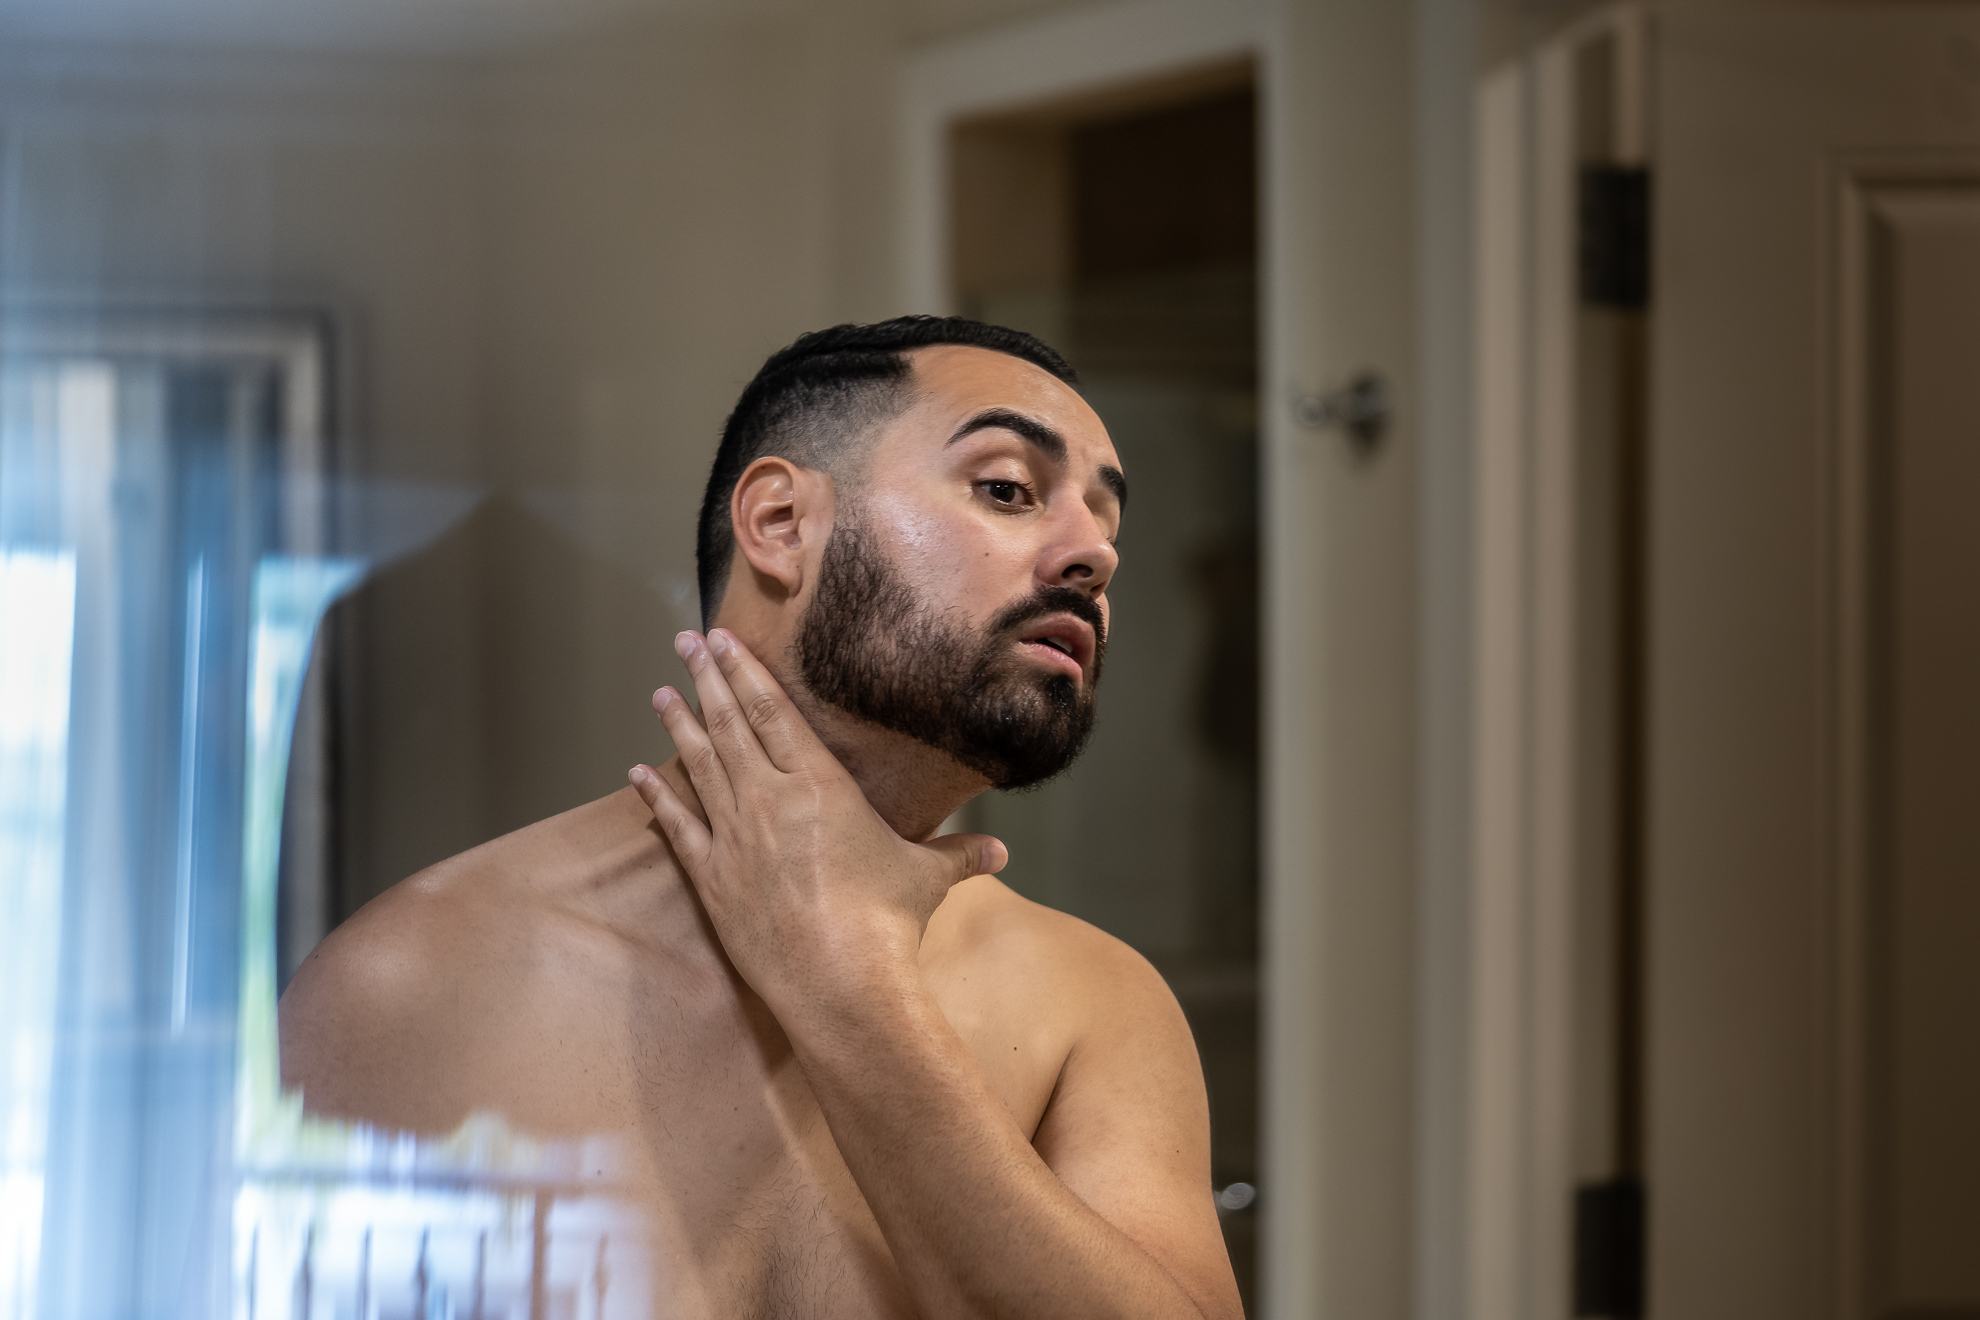 ThomasKim_photography A man is grooming his beard in front of a mirror.